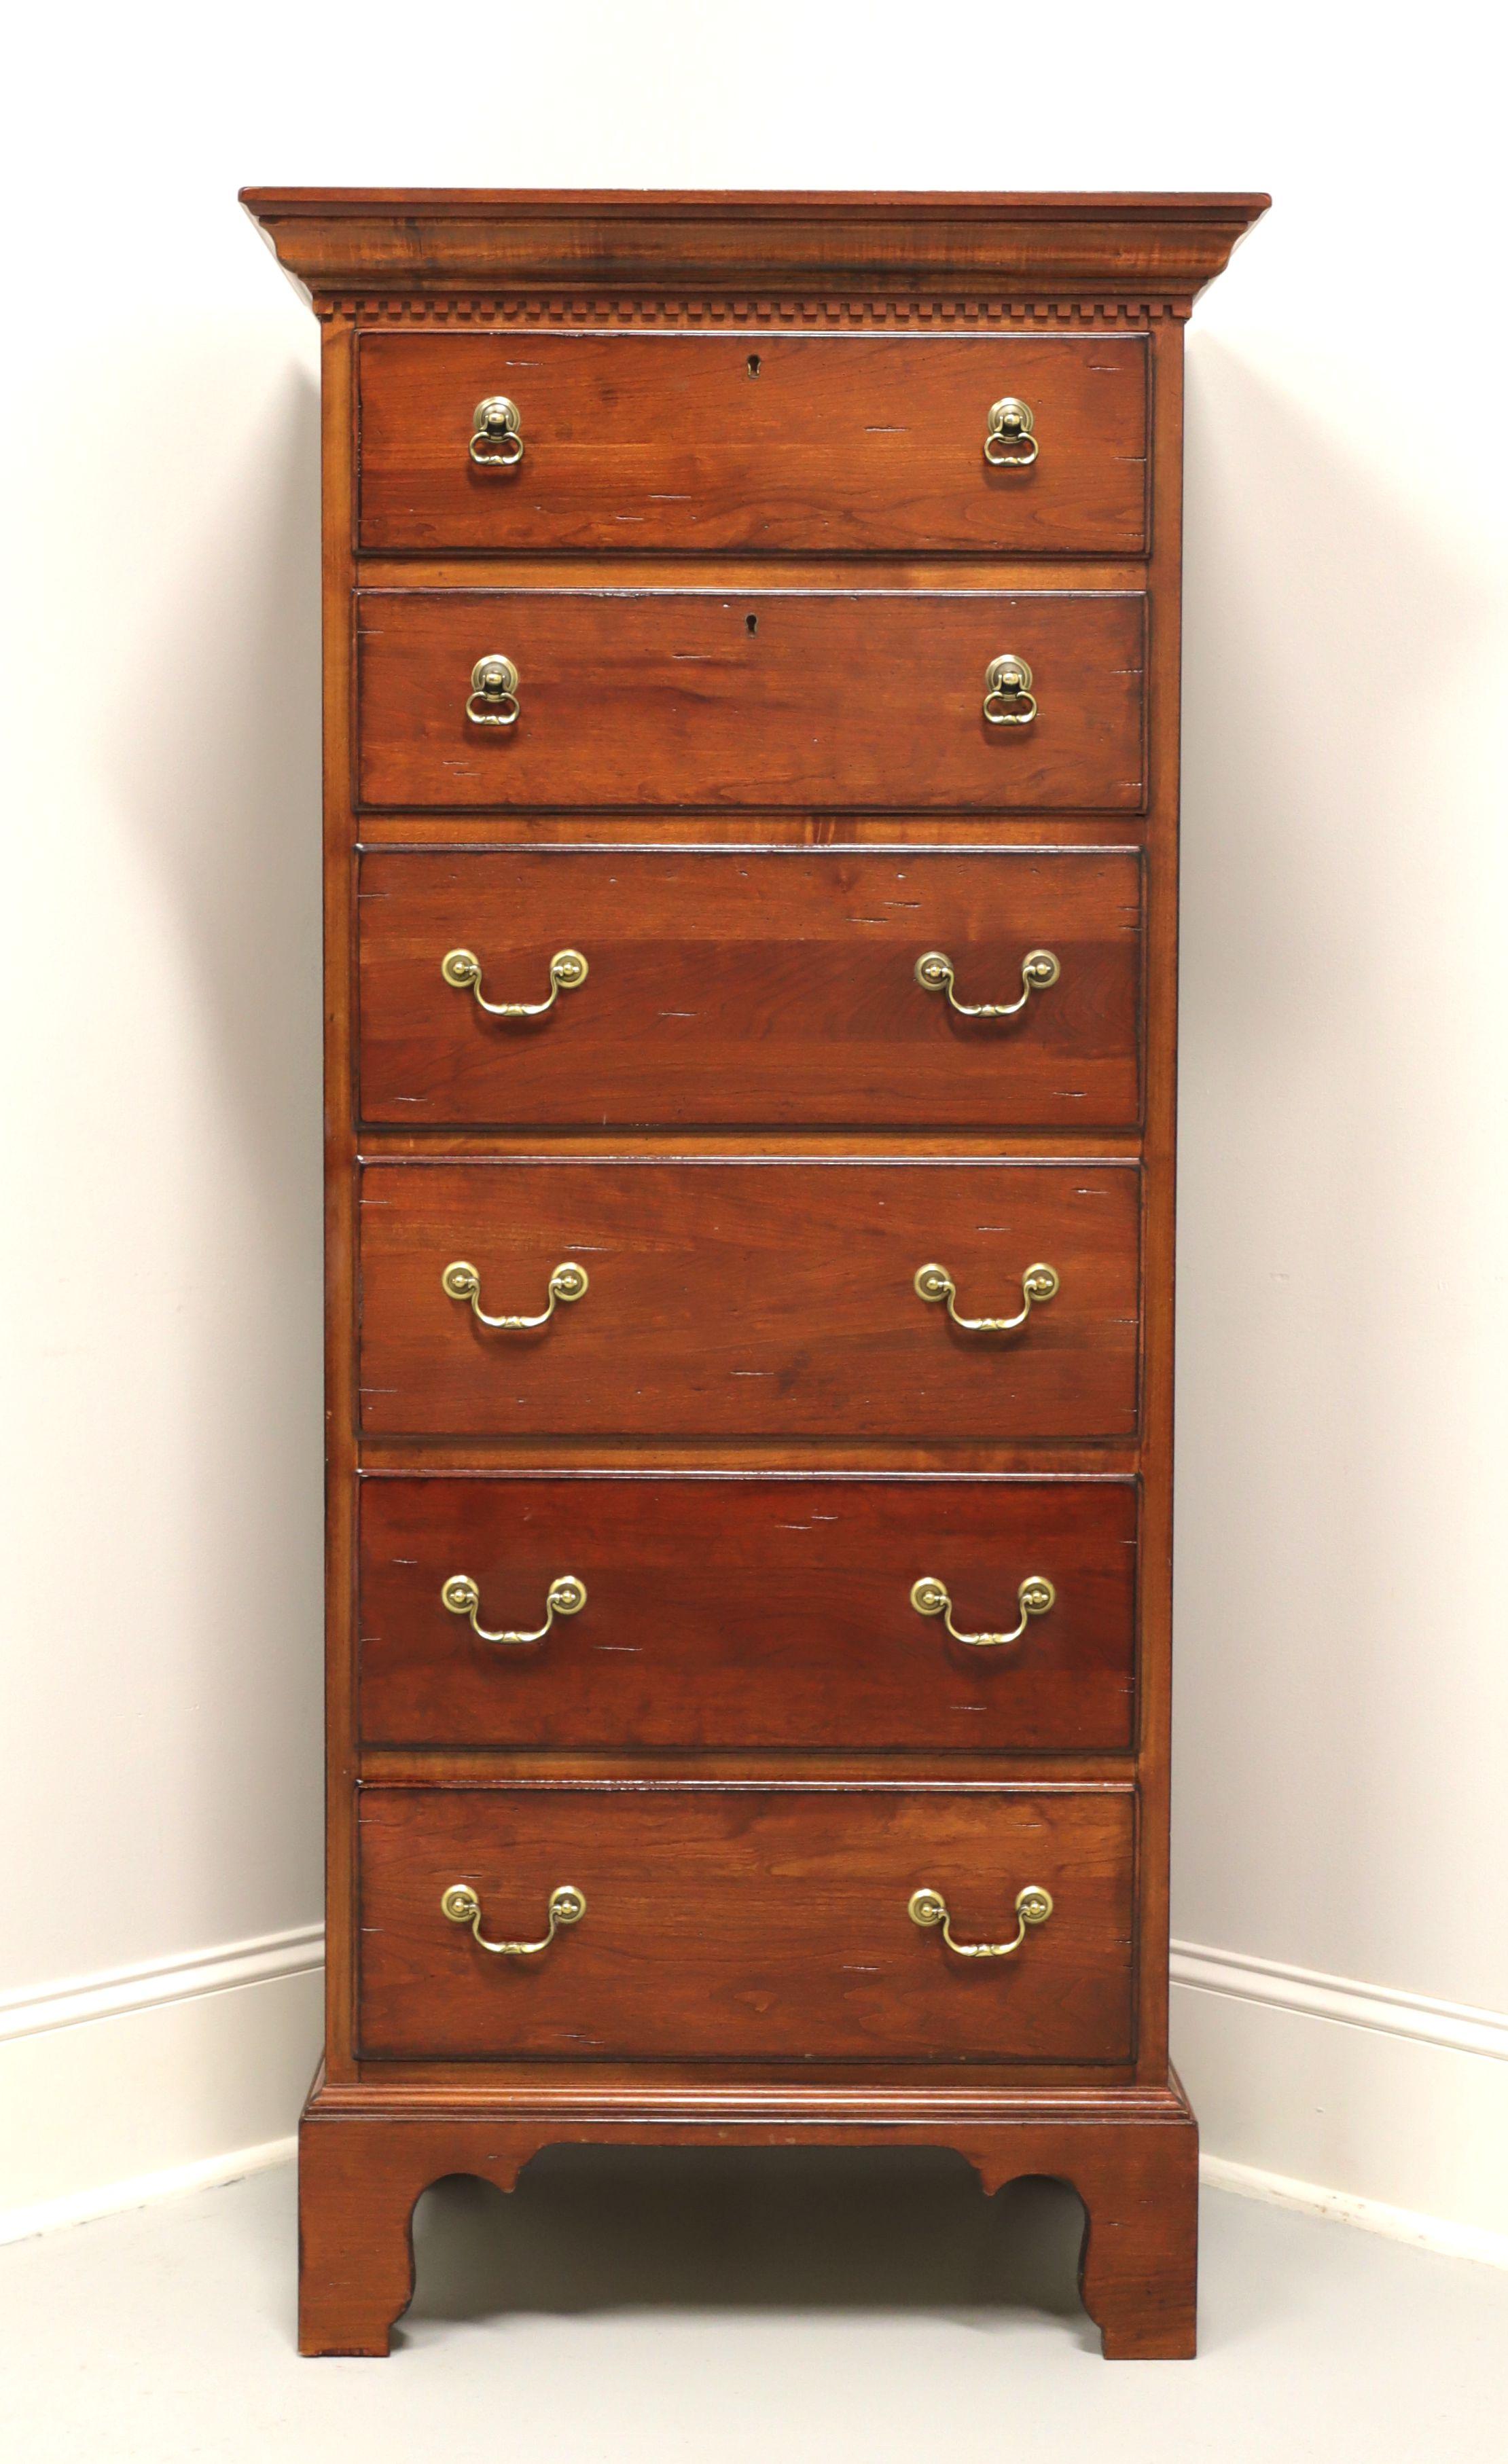 A Chippendale style lingerie chest from quality furniture maker Lexington, from their Bob Timberlake collection. Solid cherry with a distressed finish, crown & dentil molding to top, brass hardware and tall bracket feet. Features six drawers of